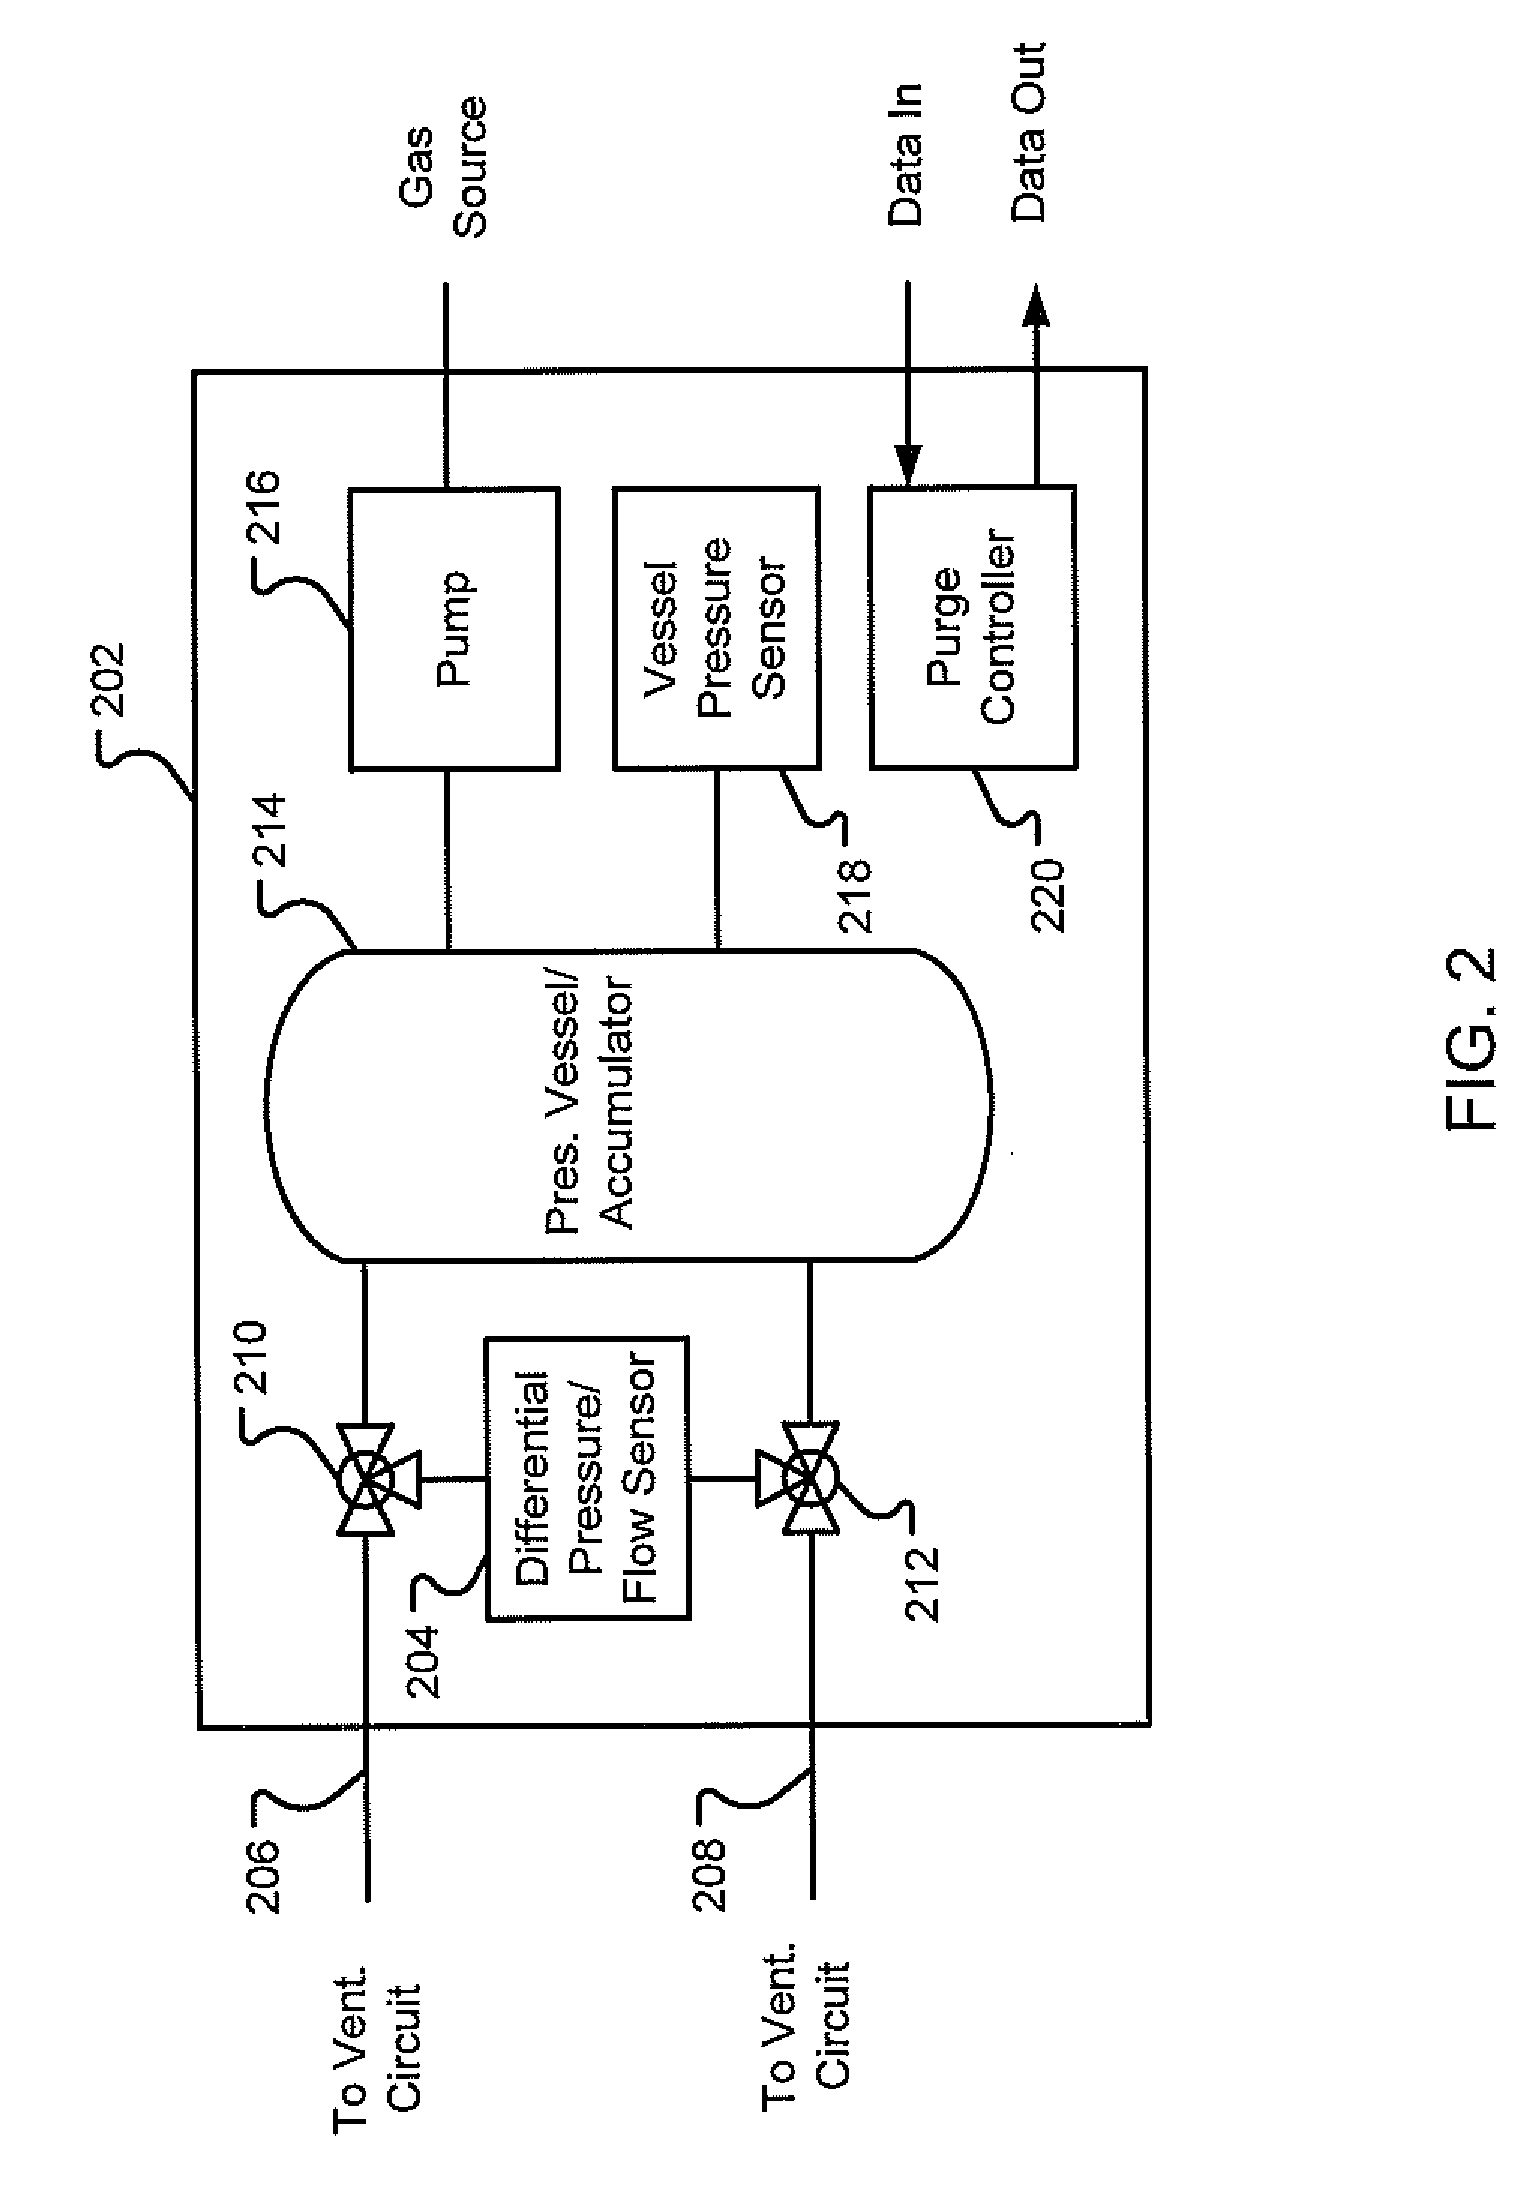 Ventilator With Controlled Purge Function